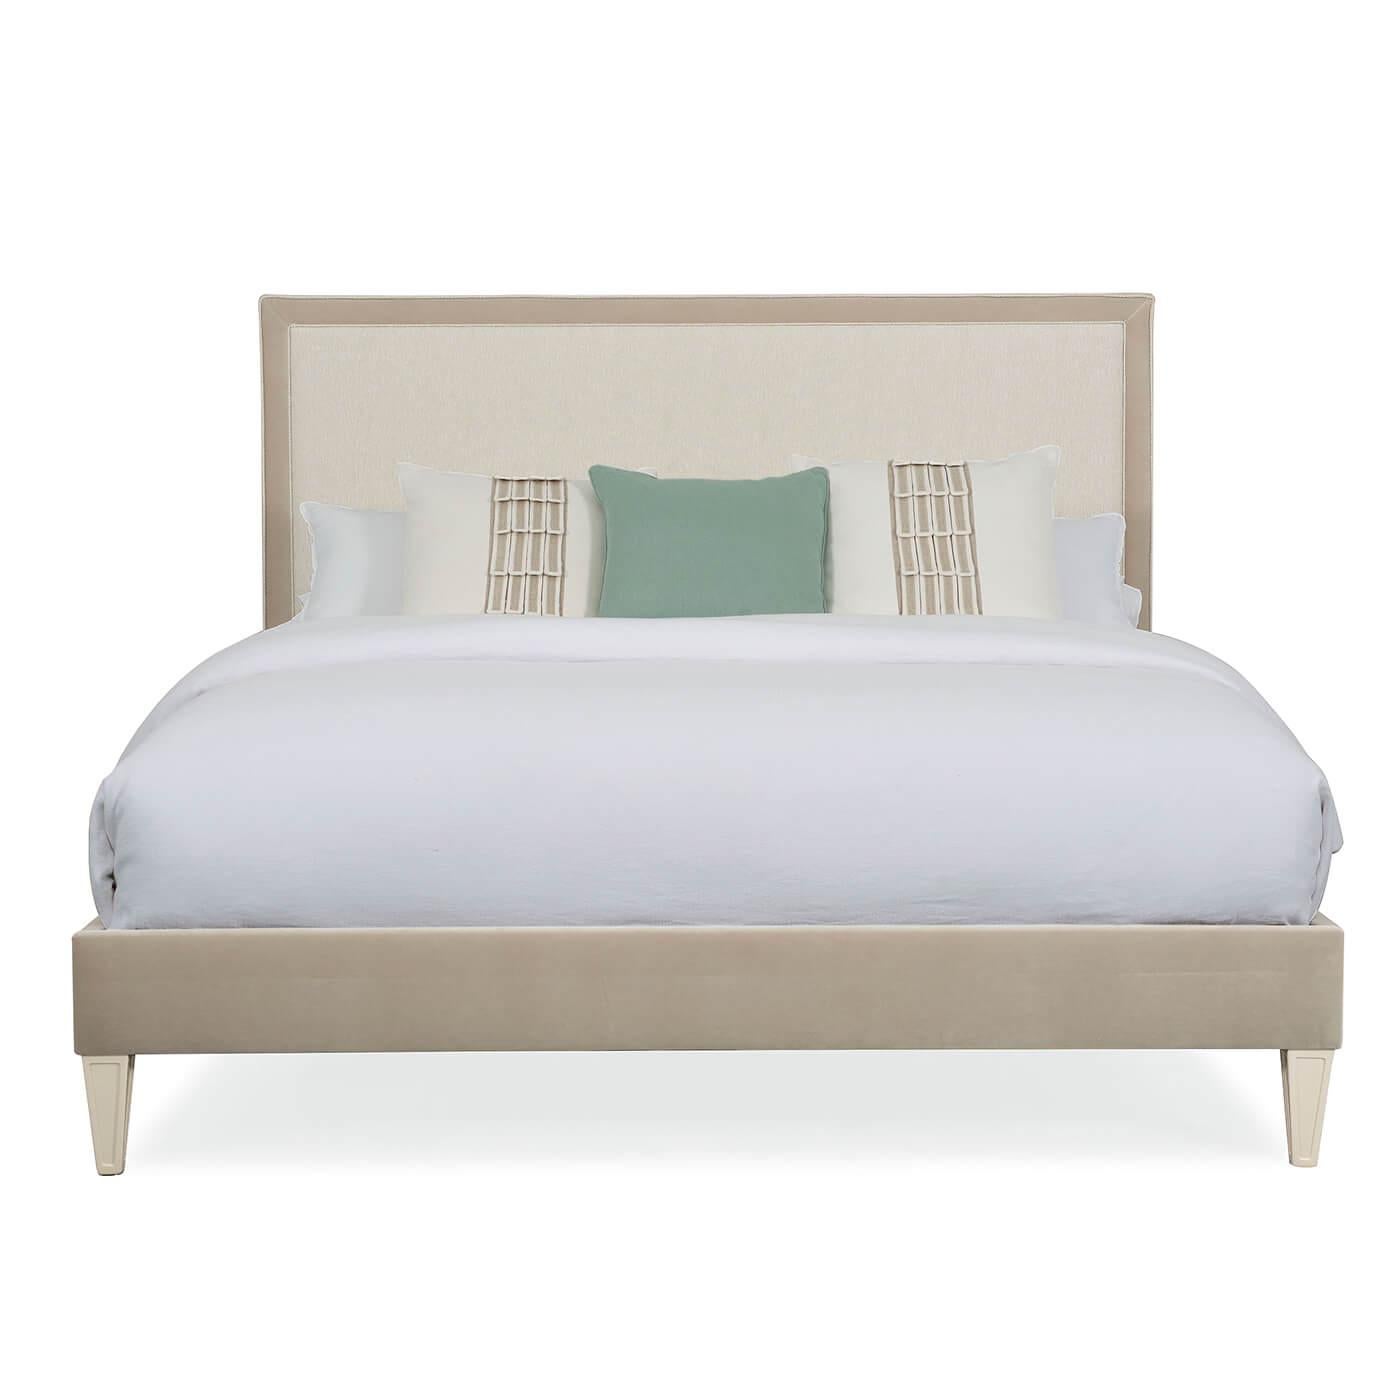 A classic upholstered king bed with timeless style and design details. This luxurious bed has a plush, performance fabric-covered headboard with a coordinating upholstered footboard and side rails. This bed rests on tapered legs in Pearl Drop